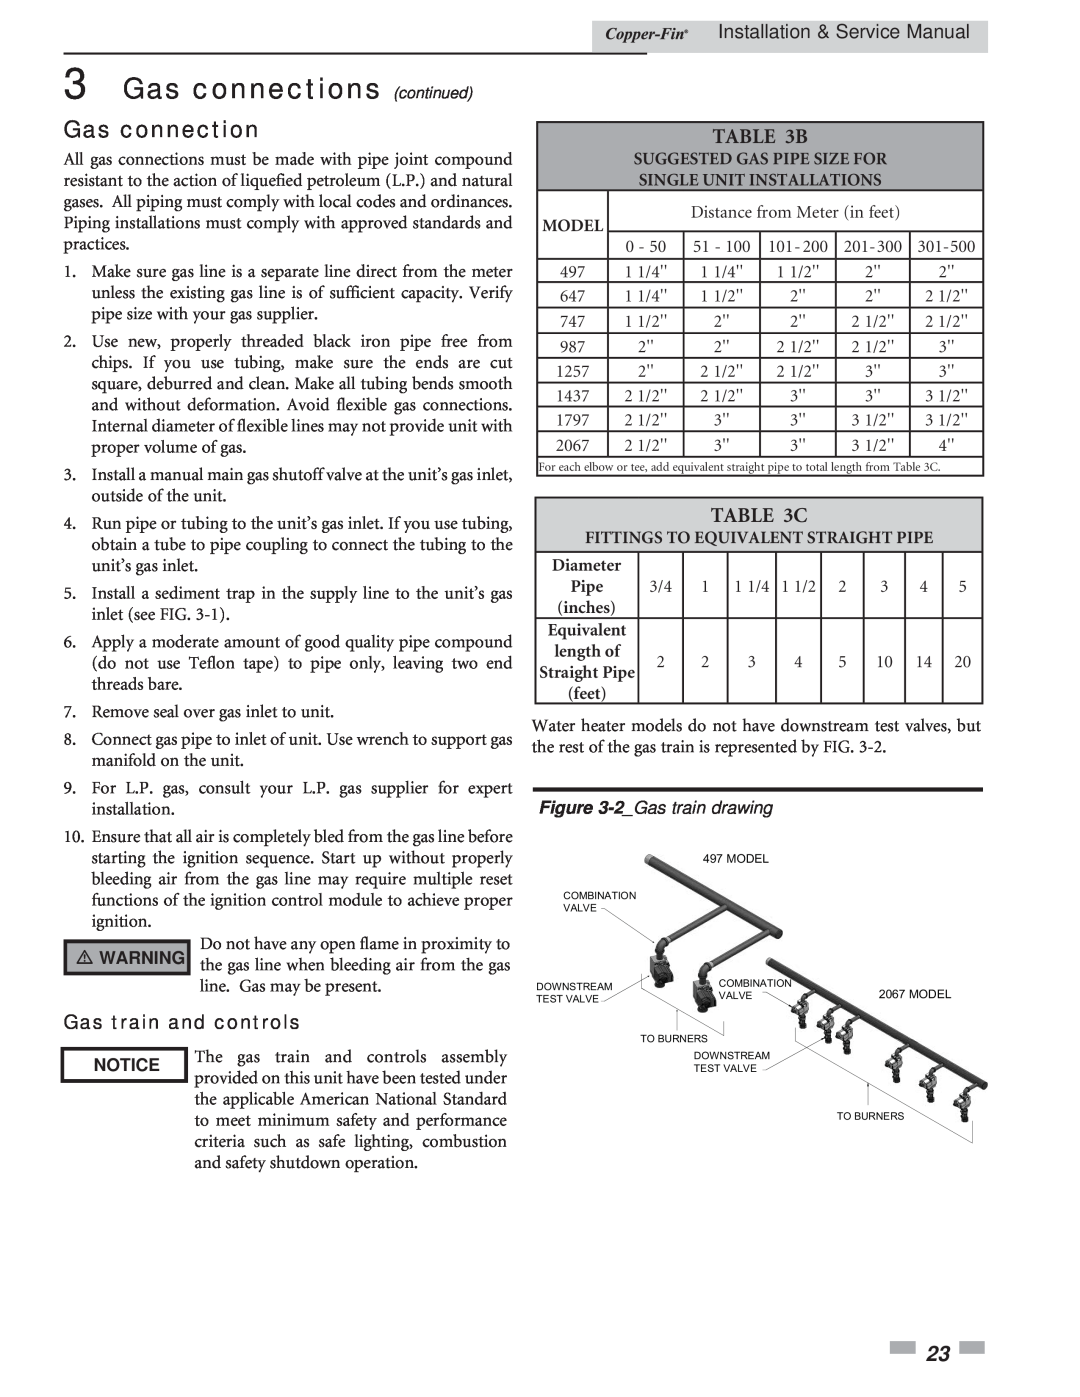 Lochinvar 497 - 2067 service manual Gas connections continued, B, C, Gas train and controls, 2_Gastrain drawing, Notice 